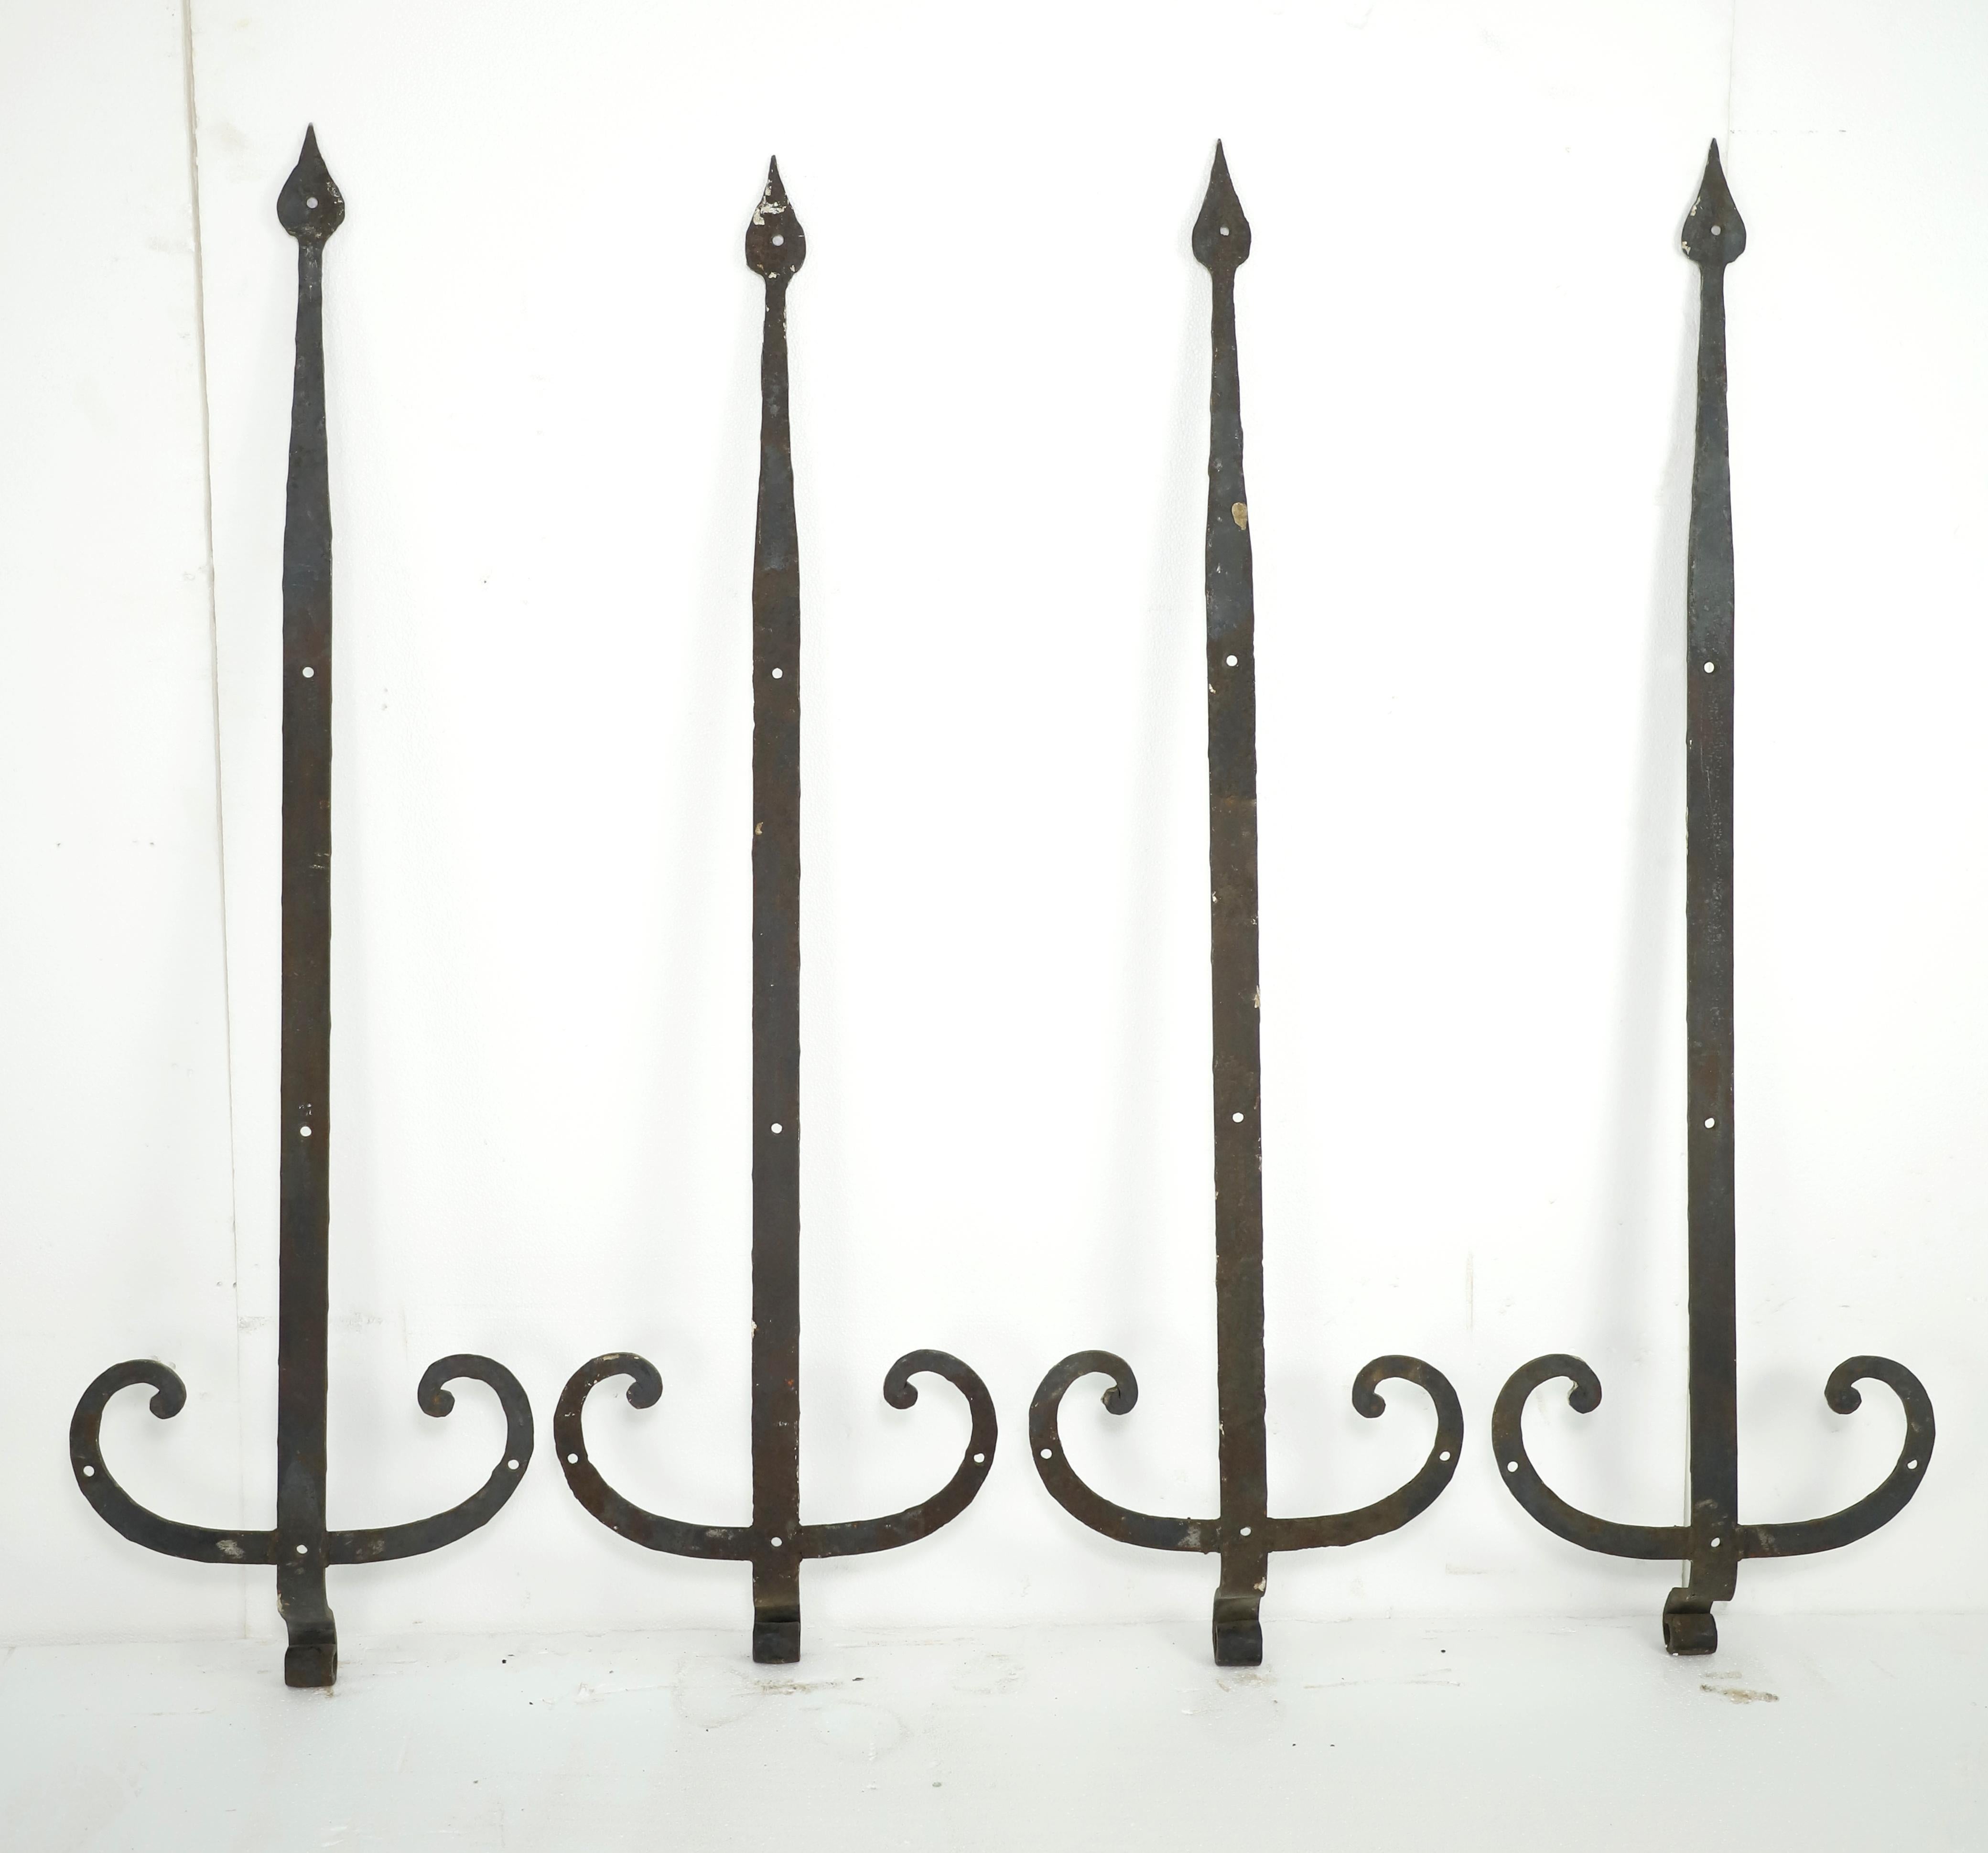 Black antique spear shaped strap hinges with curled details on the sides. All hand forged. They are in good condition. Priced as a set. Please note, this item is located in our Scranton, PA location.